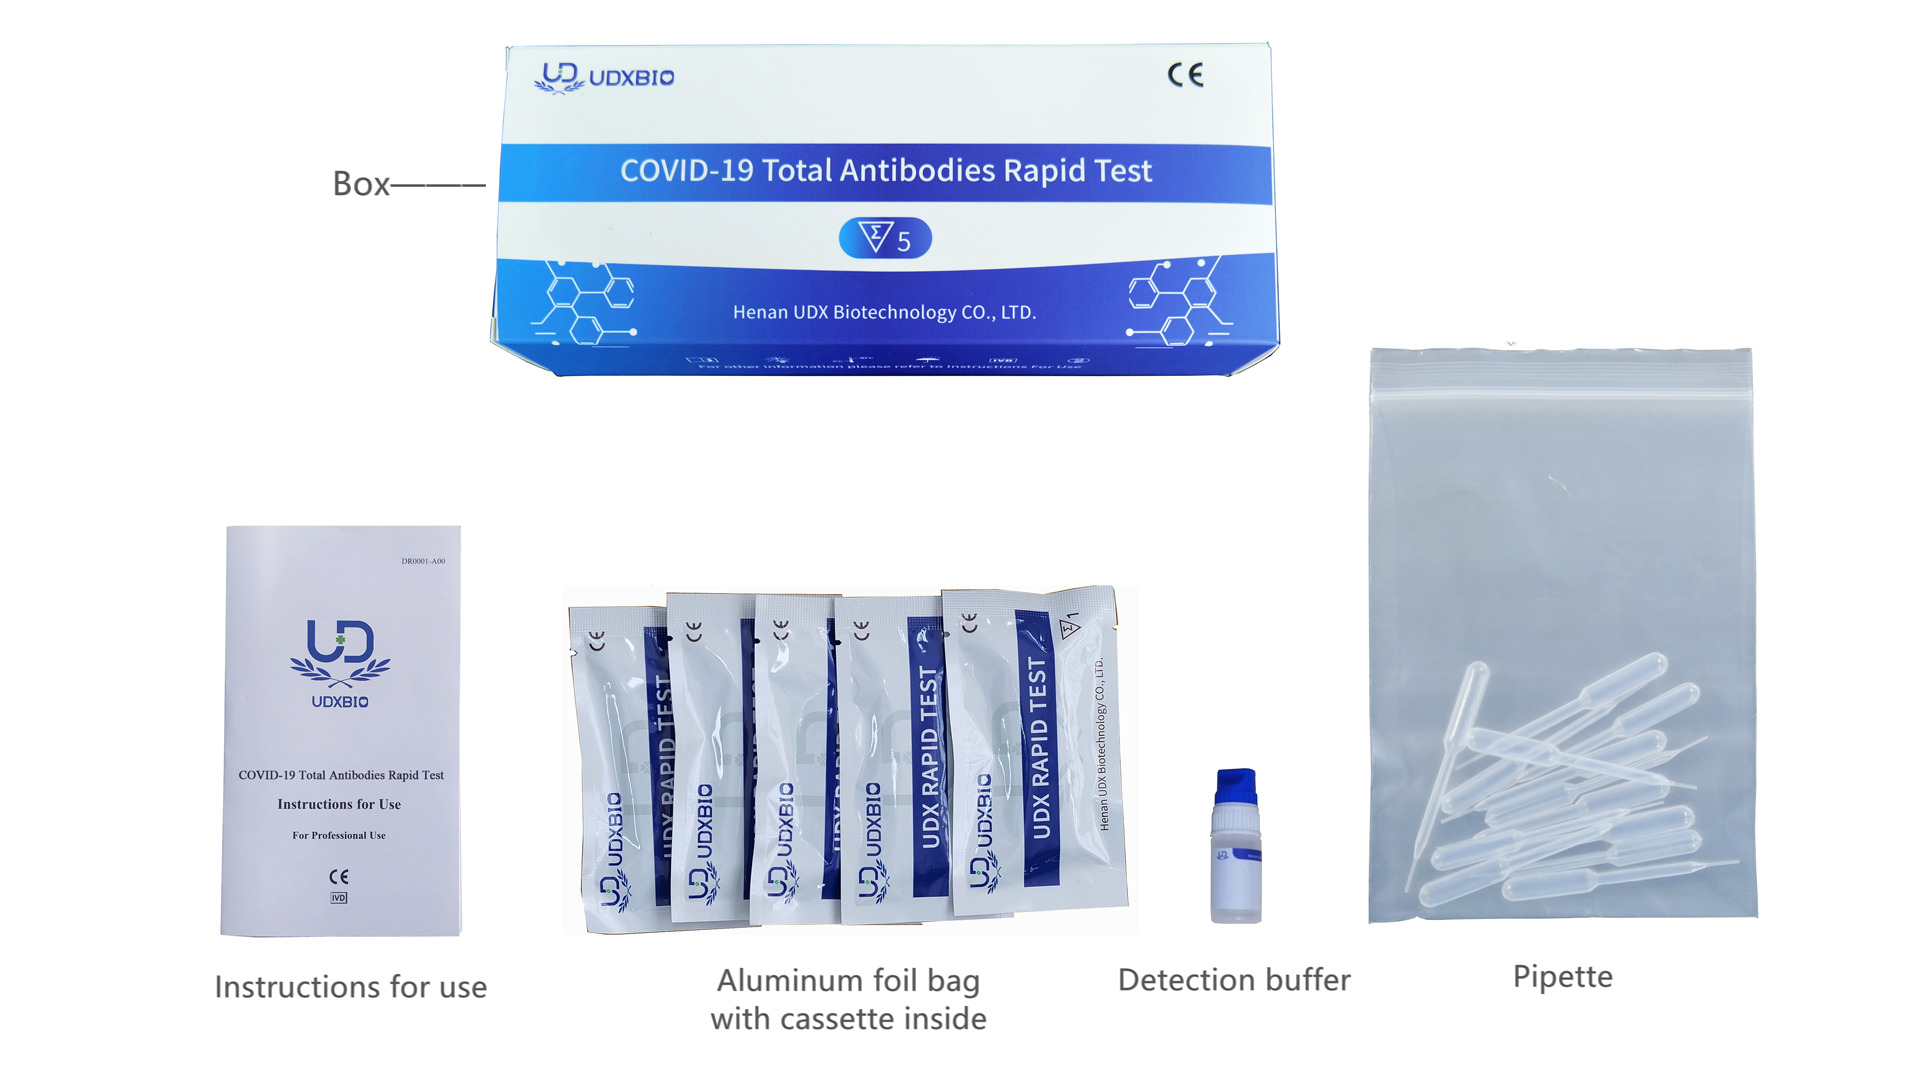 Availability And Accessibility of COVID-19 Total Antibodies Rapid Test: What You Need to Know